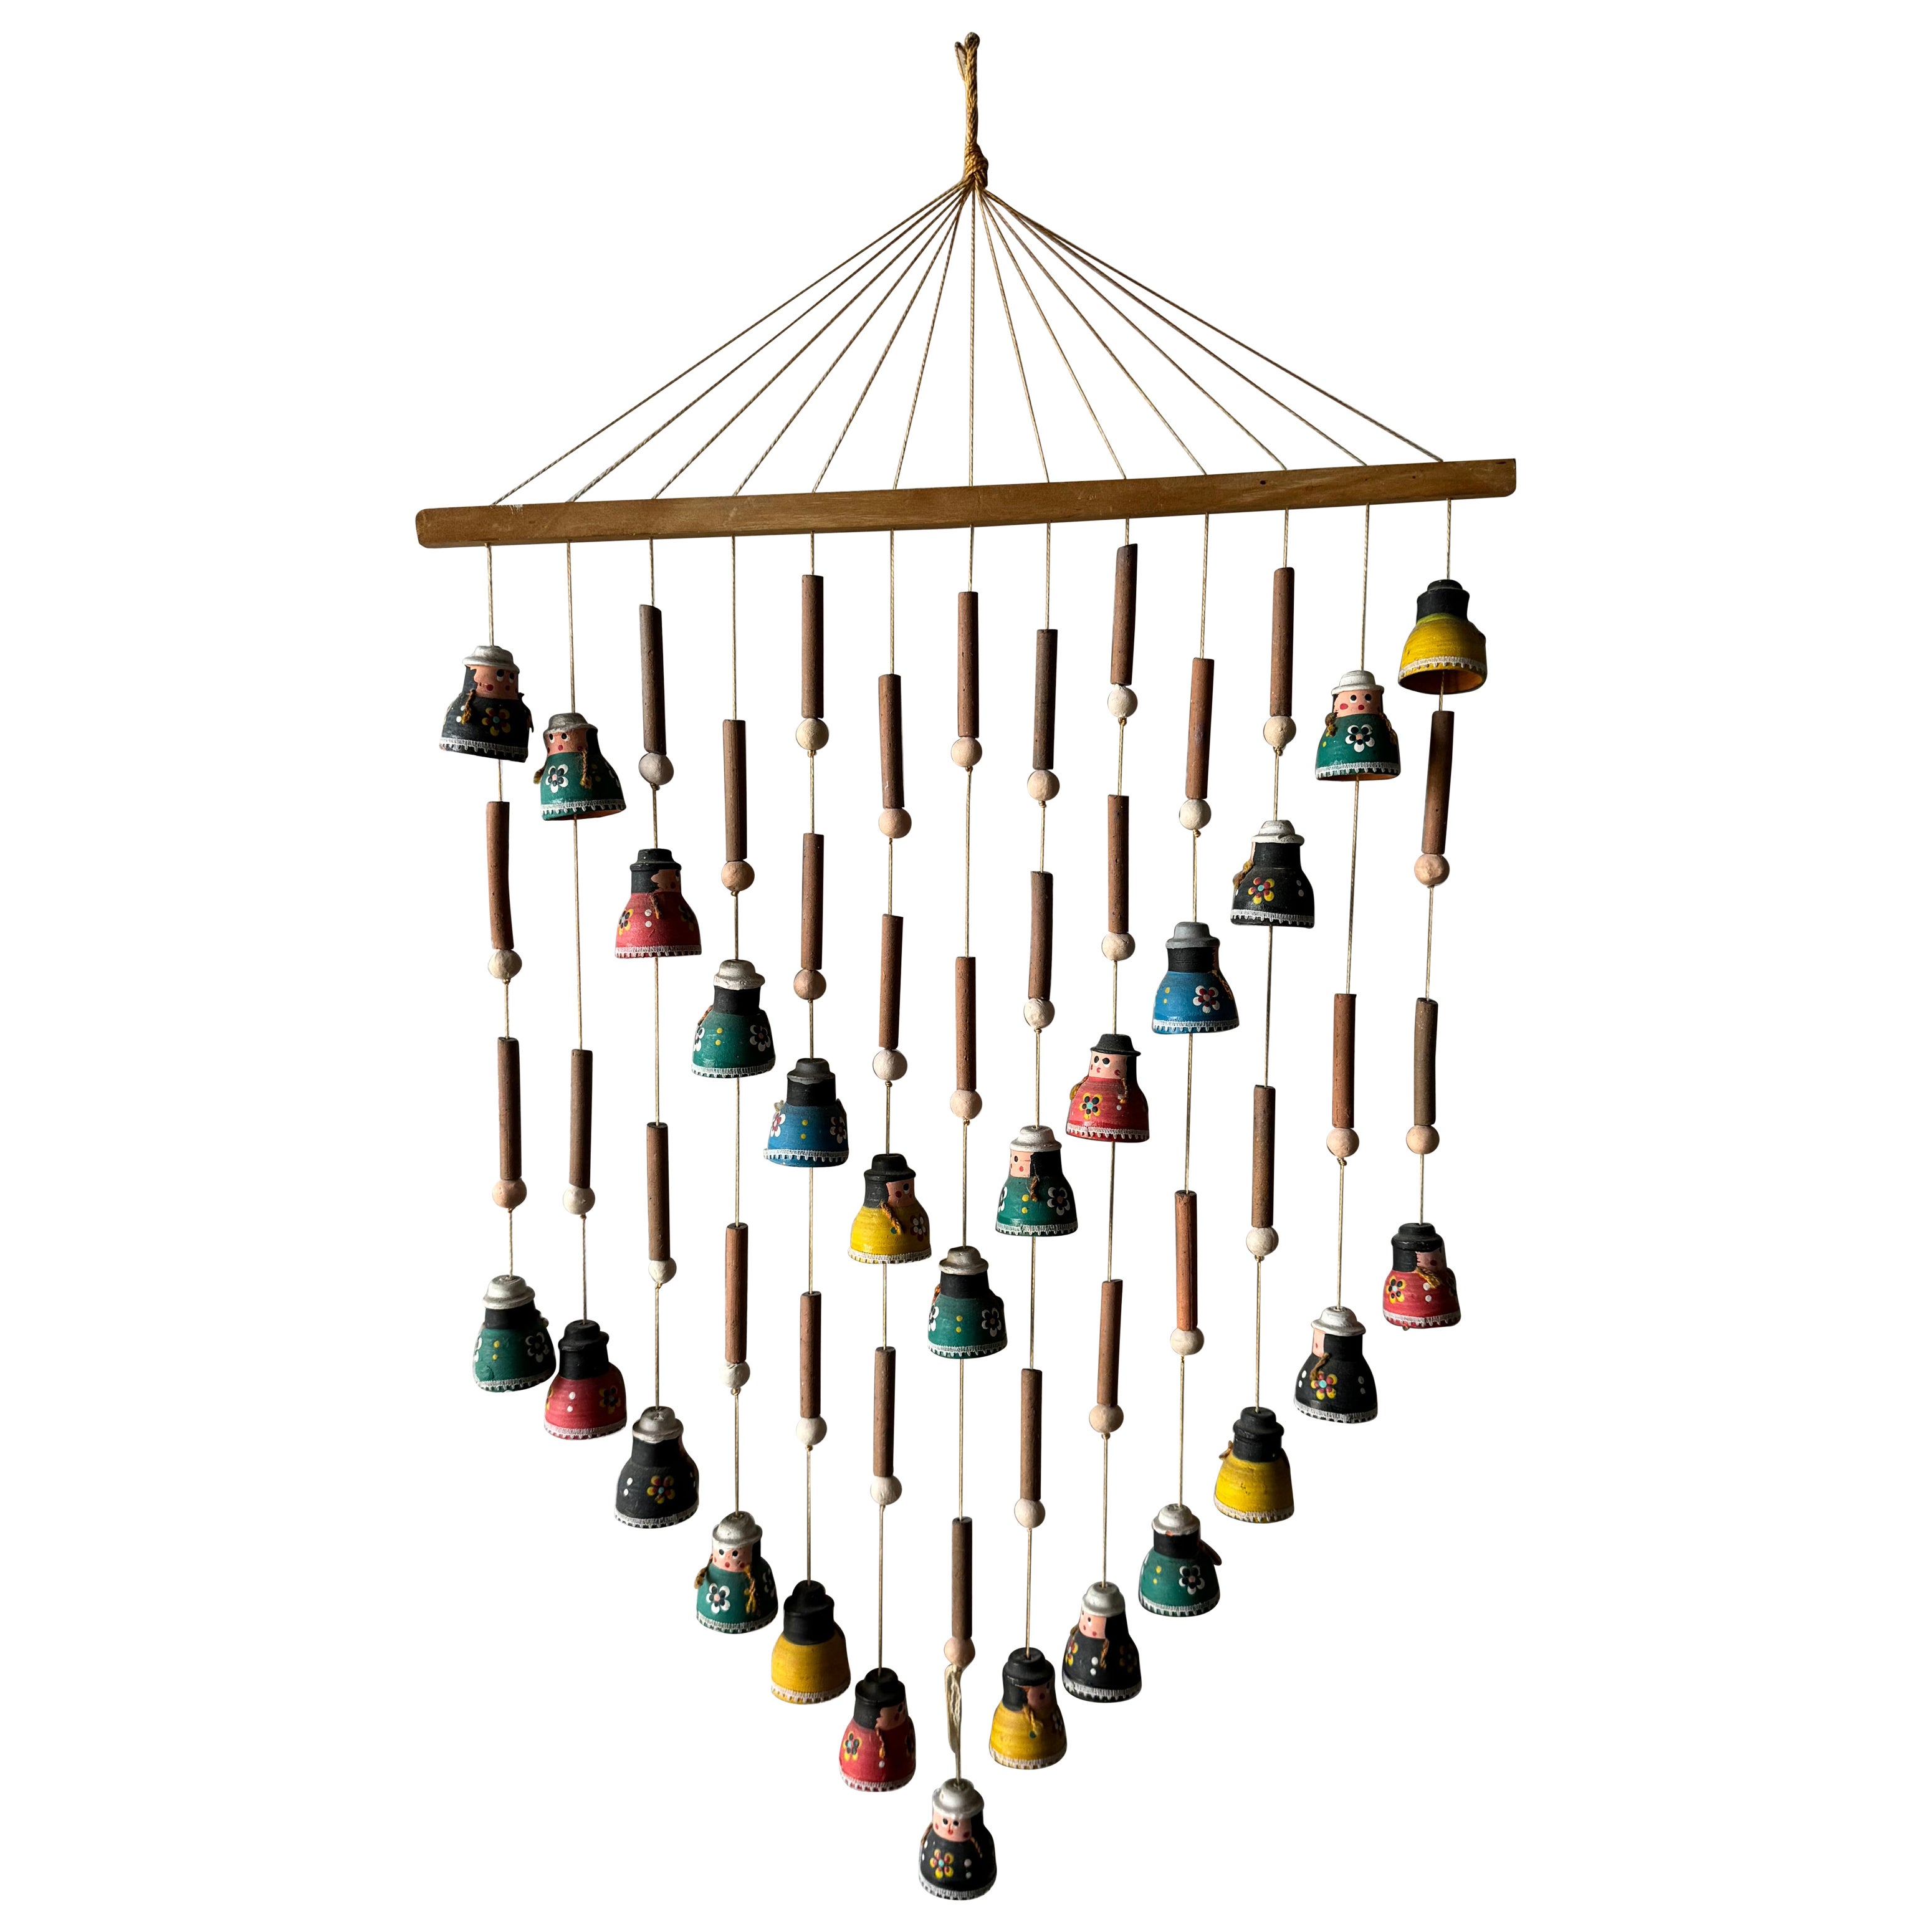 Hand Painted Mexican Folk Art Hanging Wind Chime 